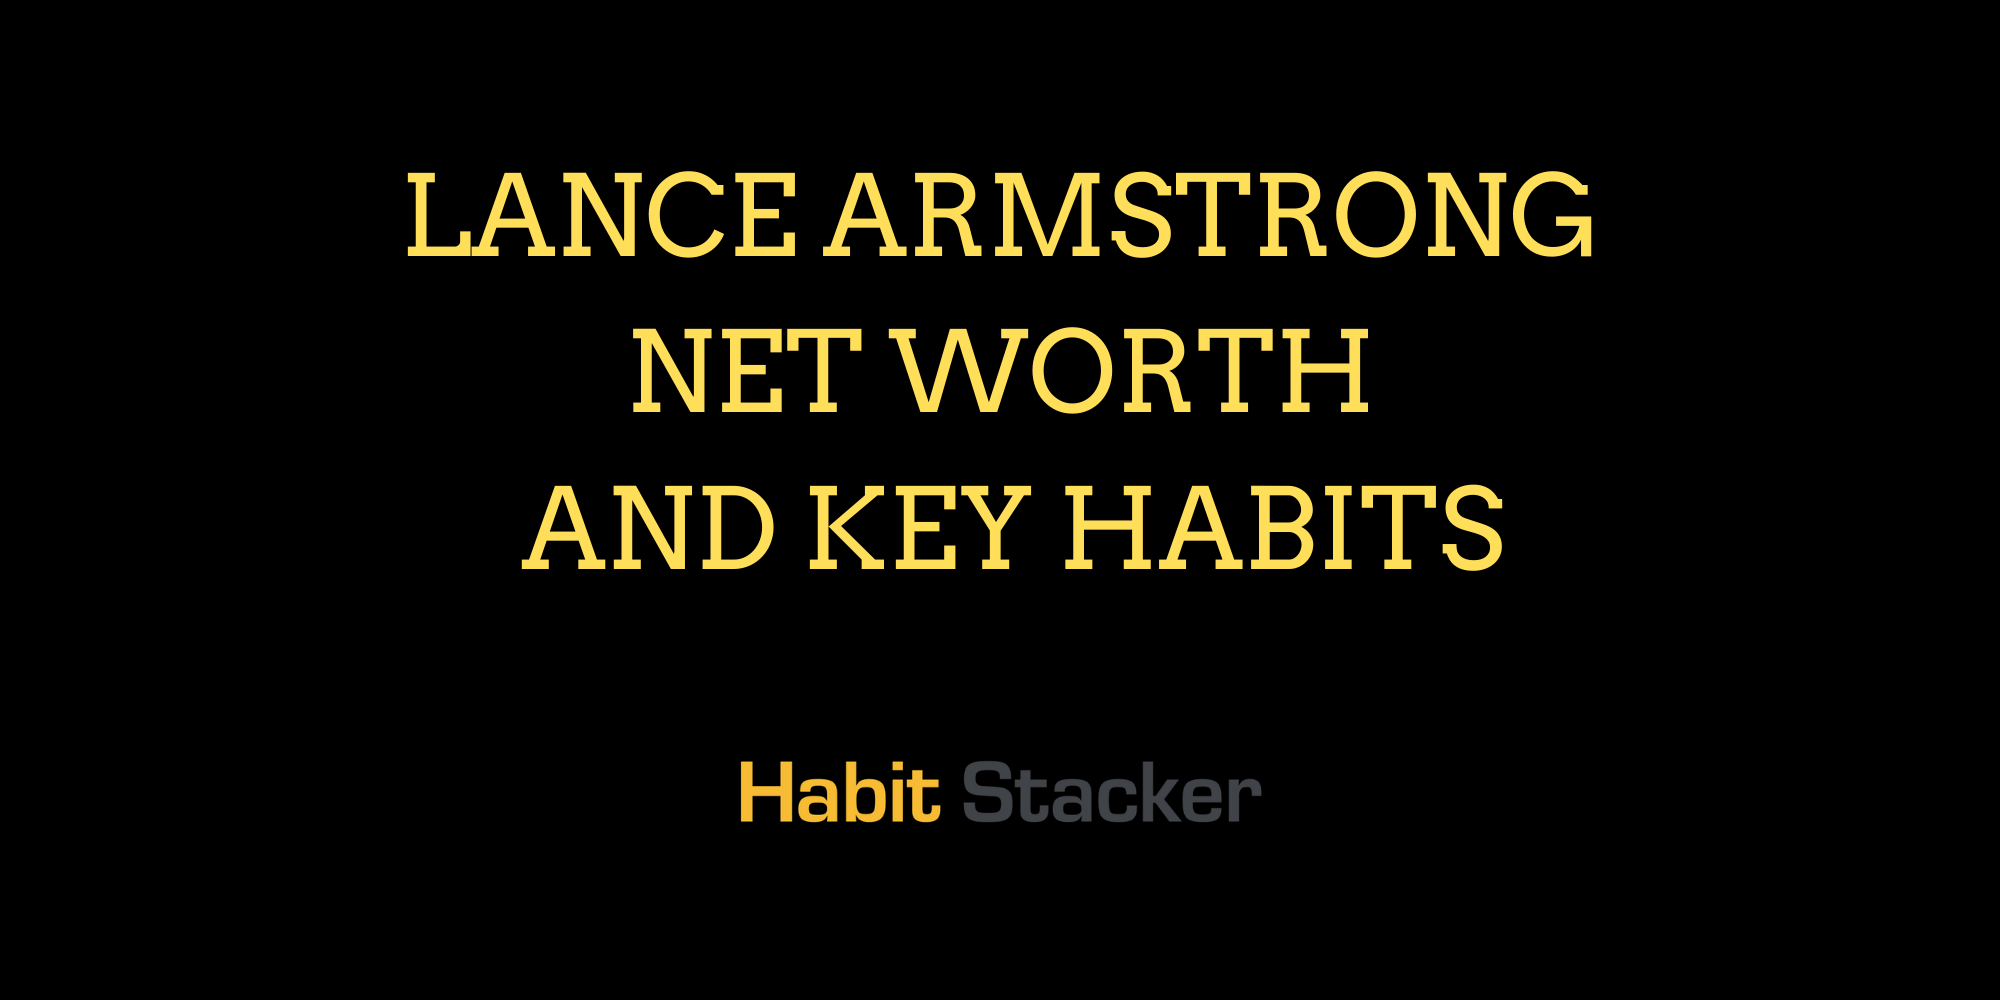 Lance Armstrong Net Worth and Key Habits